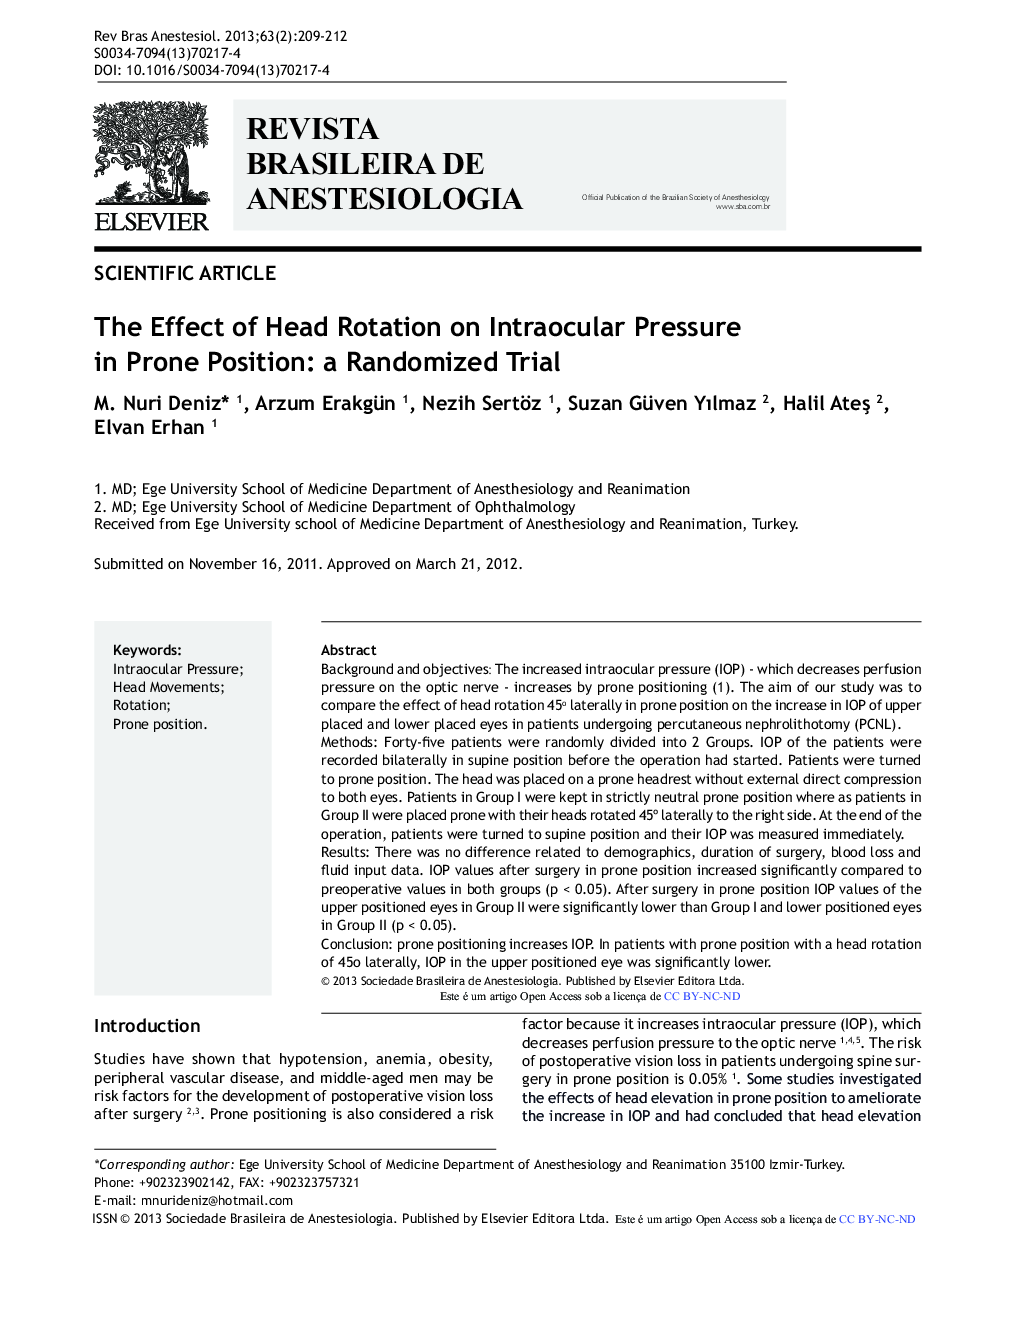 The Effect of Head Rotation on Intraocular Pressure in Prone Position: a Randomized Trial